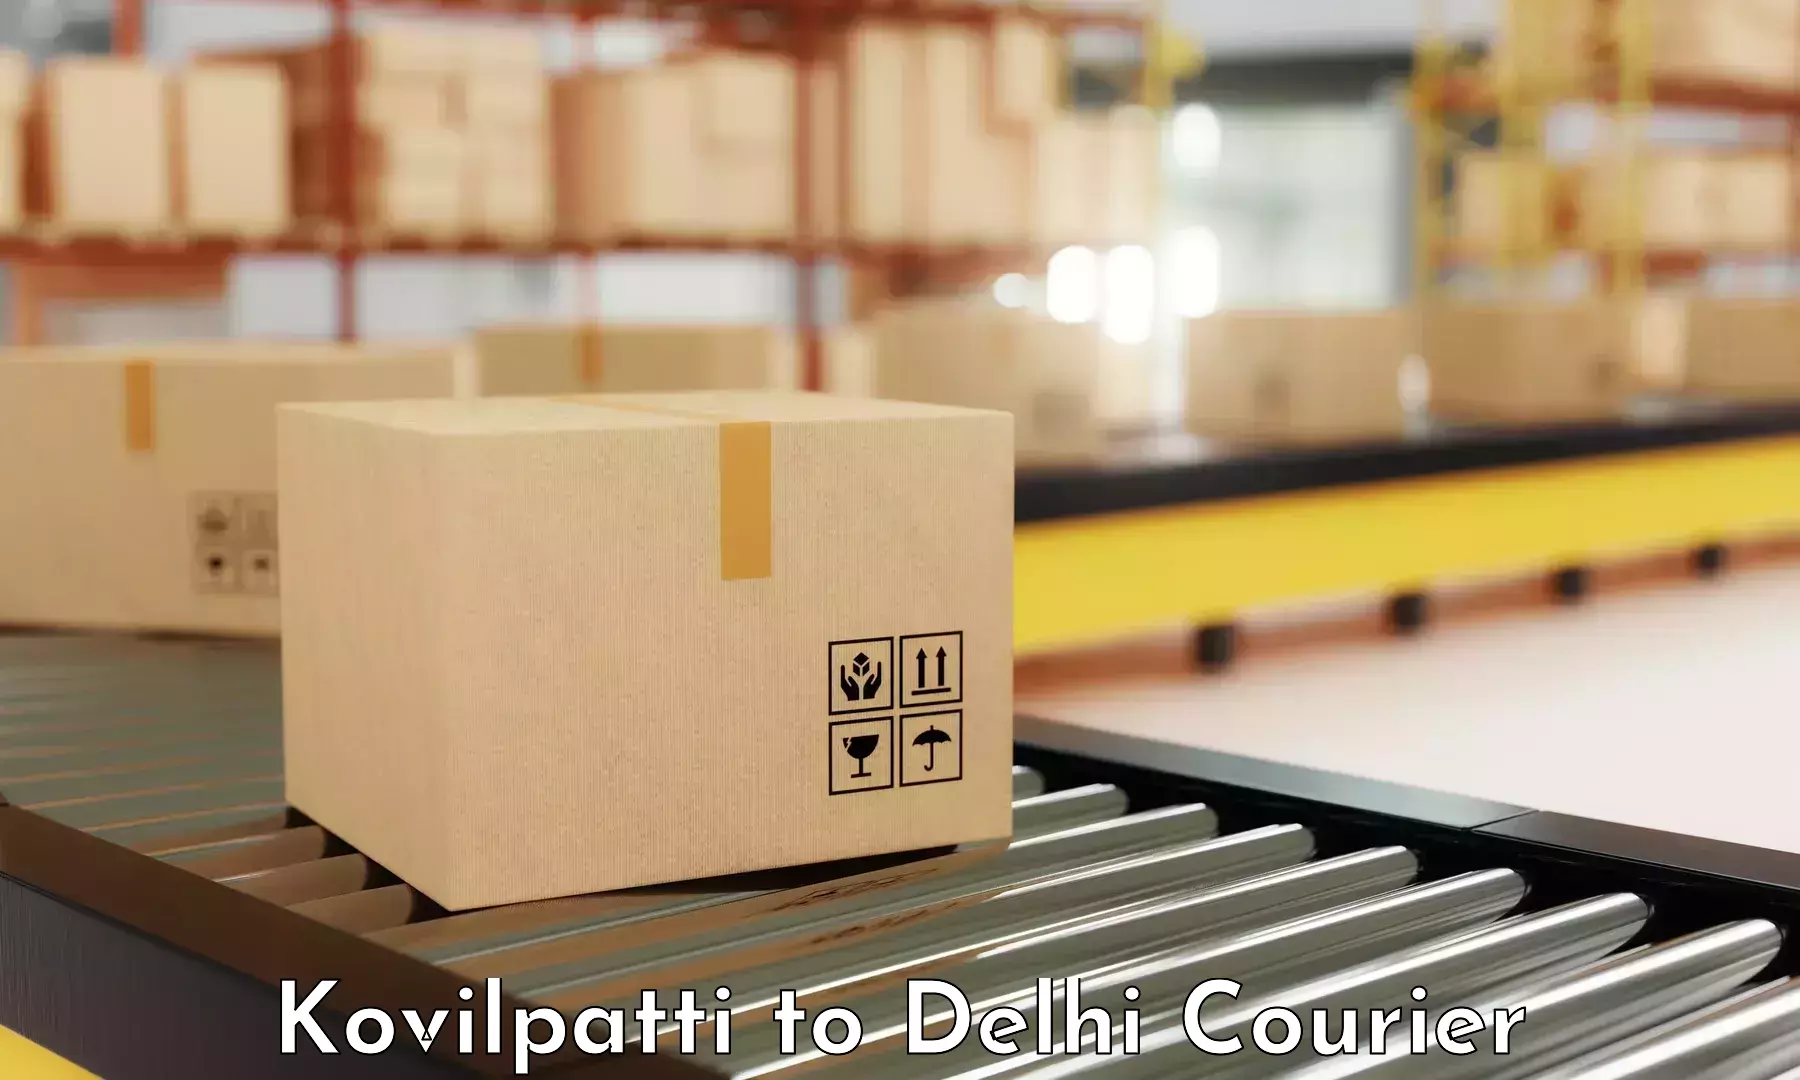 Subscription-based courier Kovilpatti to NCR